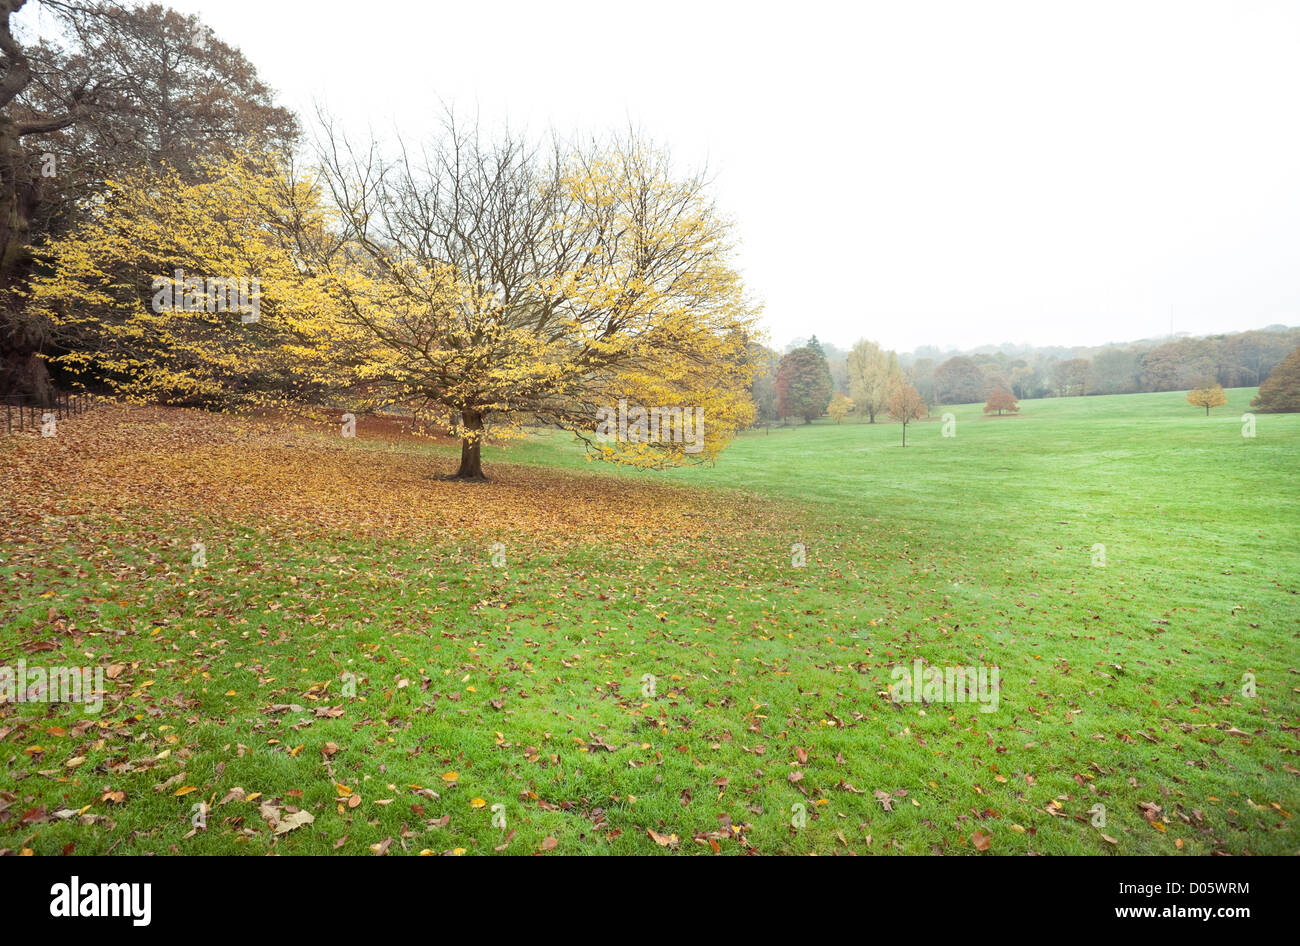 An isolated tree with fallen yellow leaves on a field of grass, Hampstead Heath, Hampstead, London, England, UK. Stock Photo